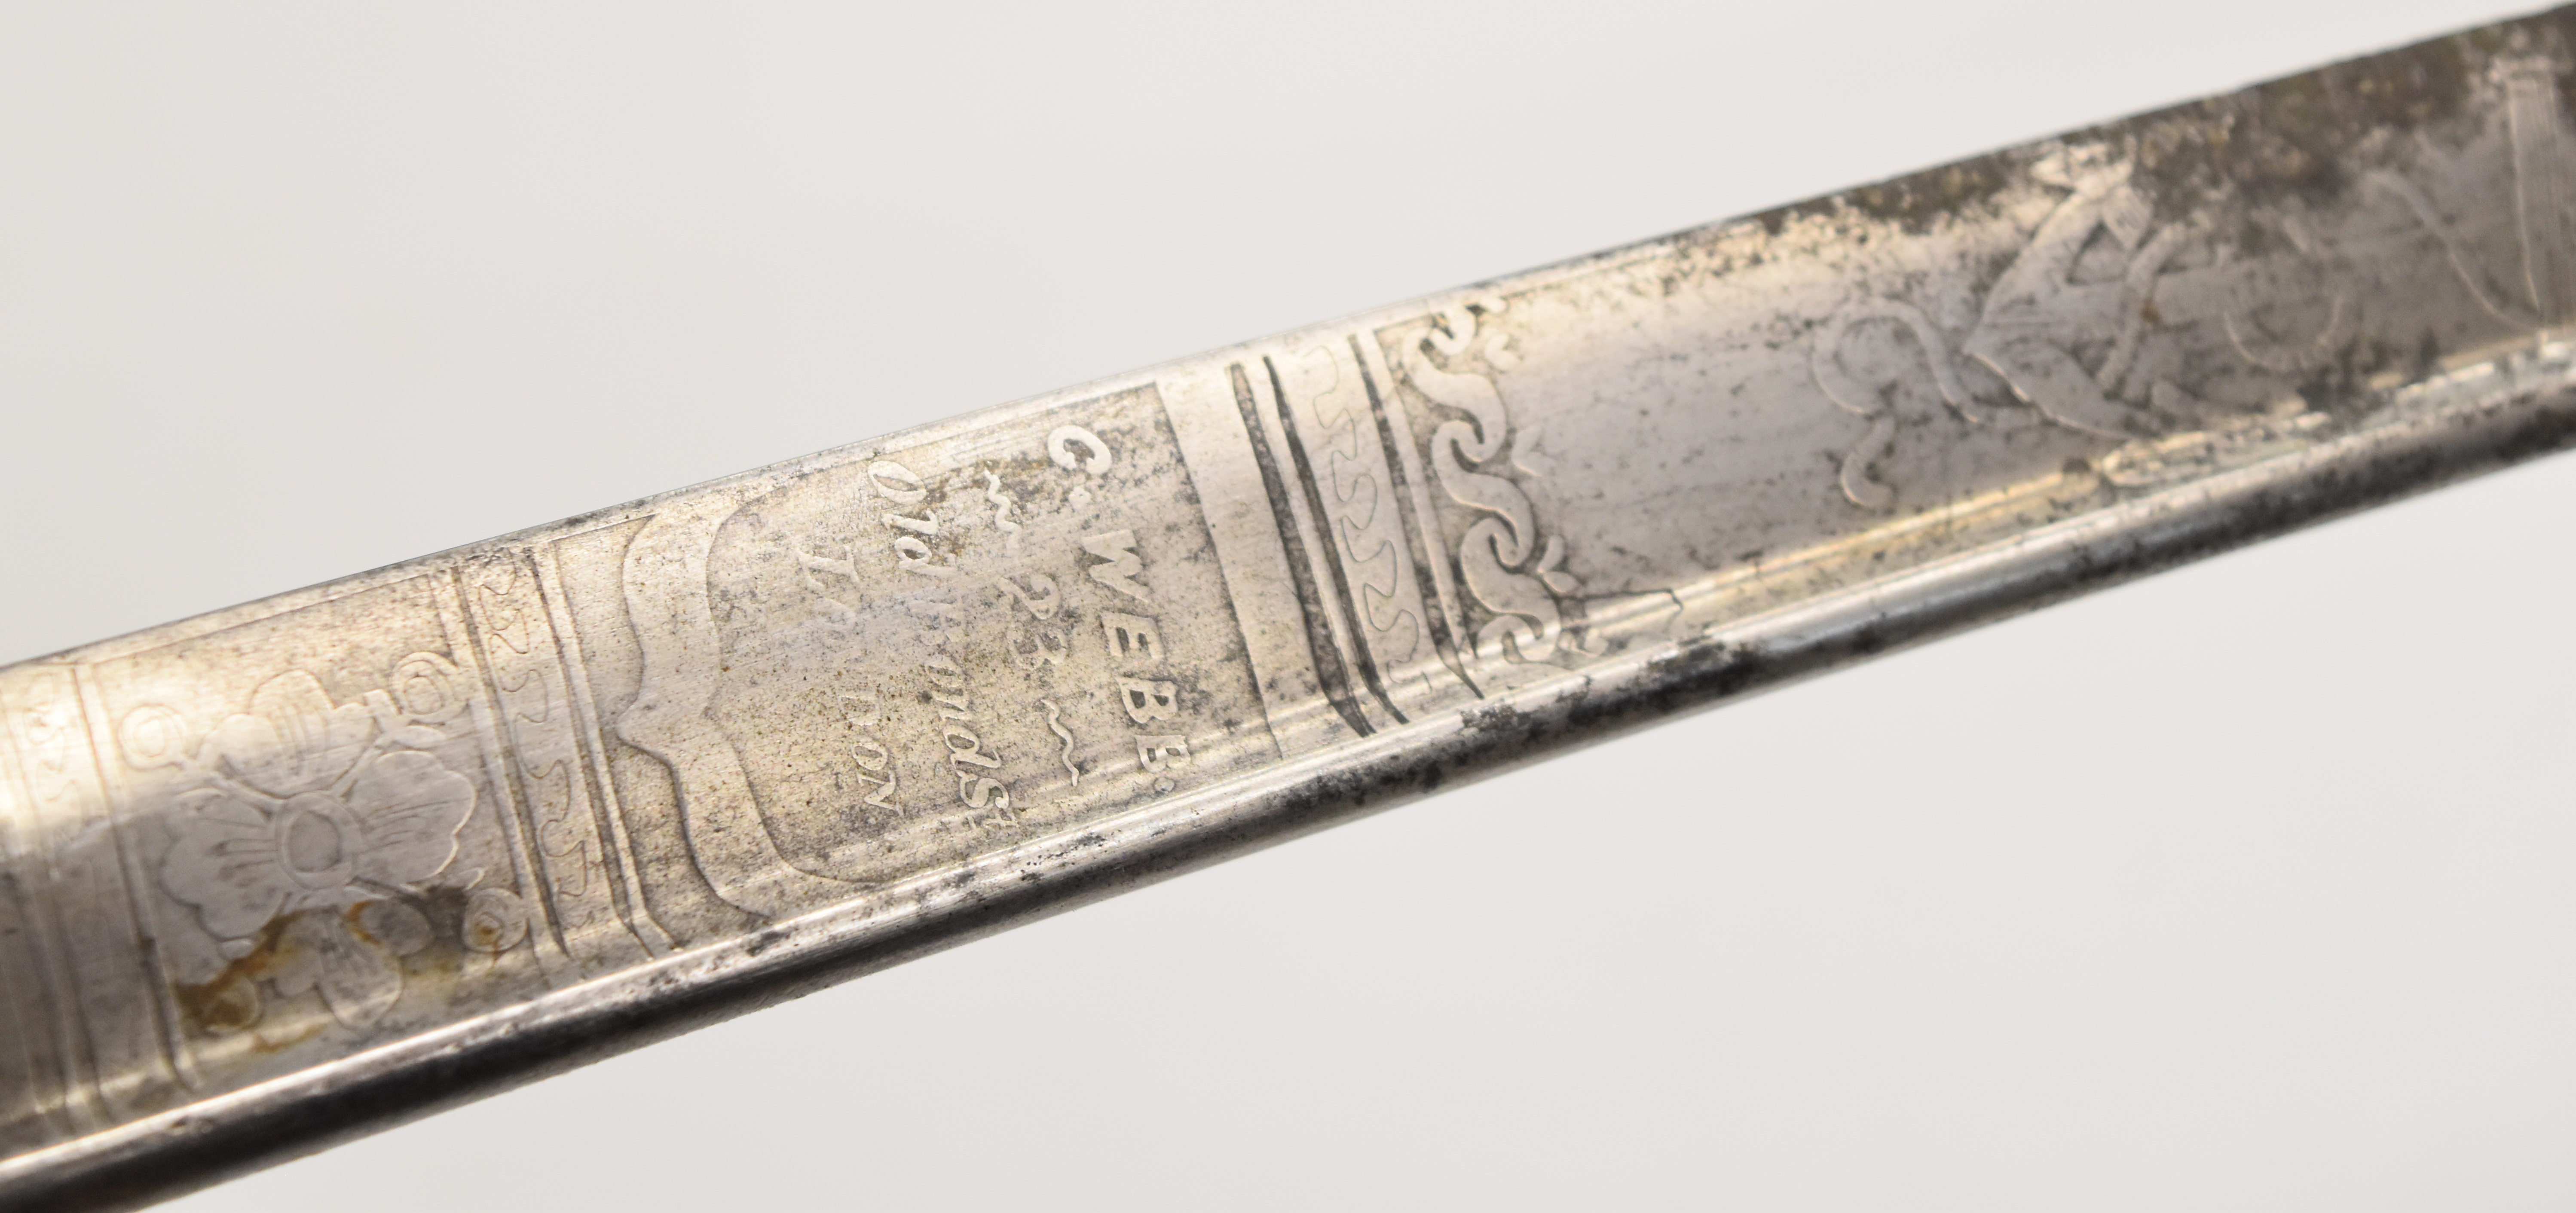 Royal Navy 1827 pattern sword with lion head pommel, folding inner guard and fouled anchor motif, - Image 8 of 11